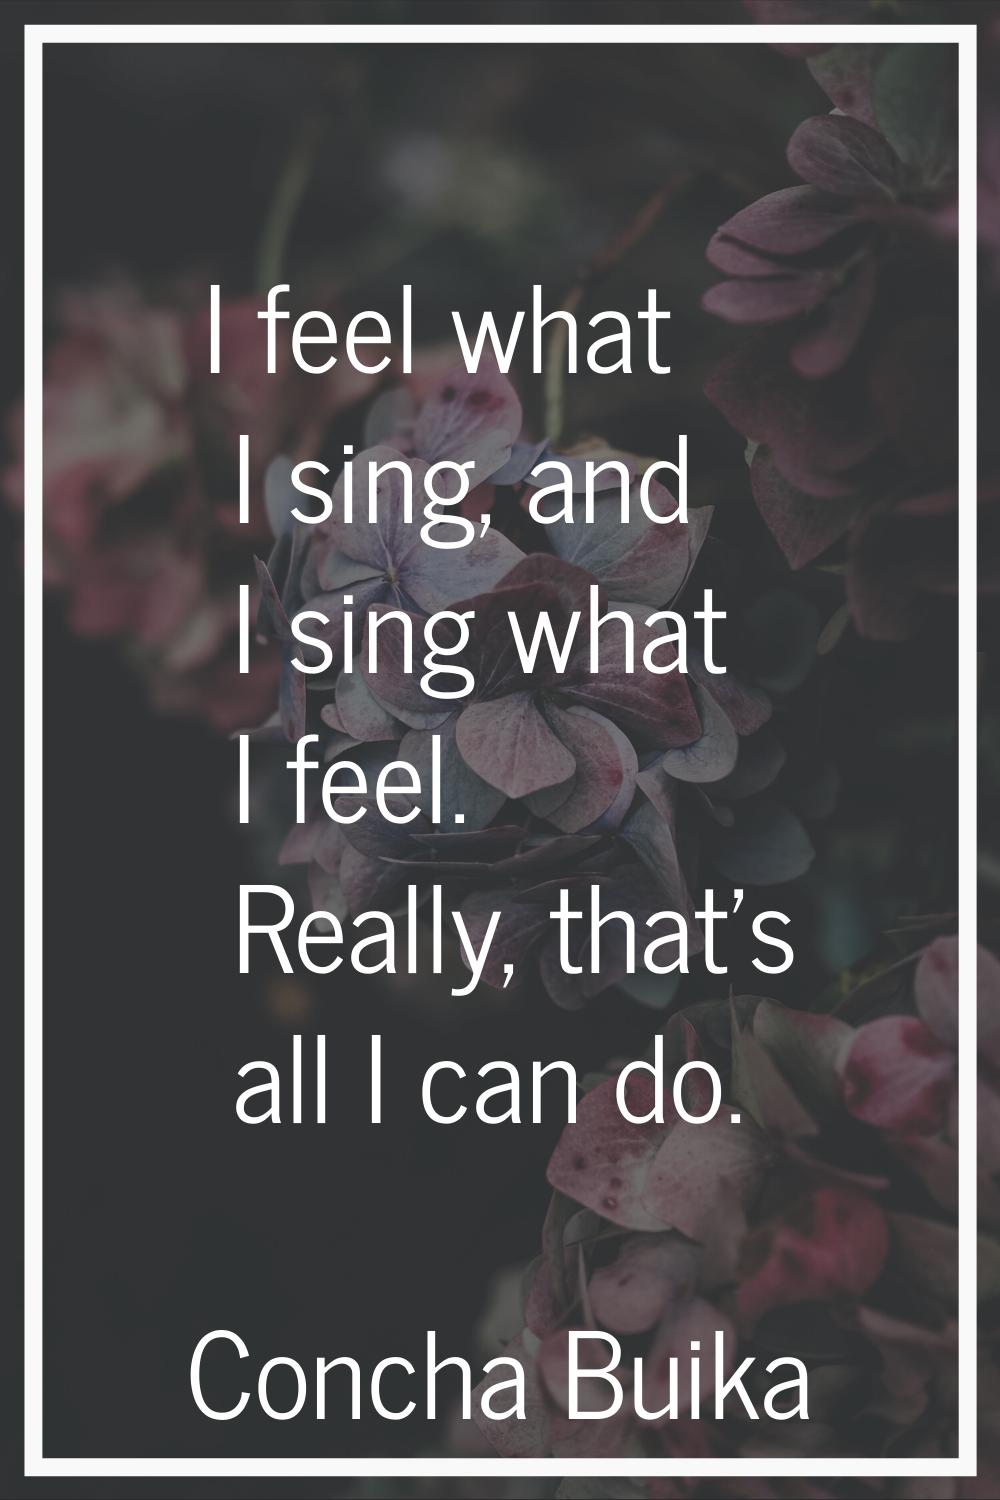 I feel what I sing, and I sing what I feel. Really, that's all I can do.